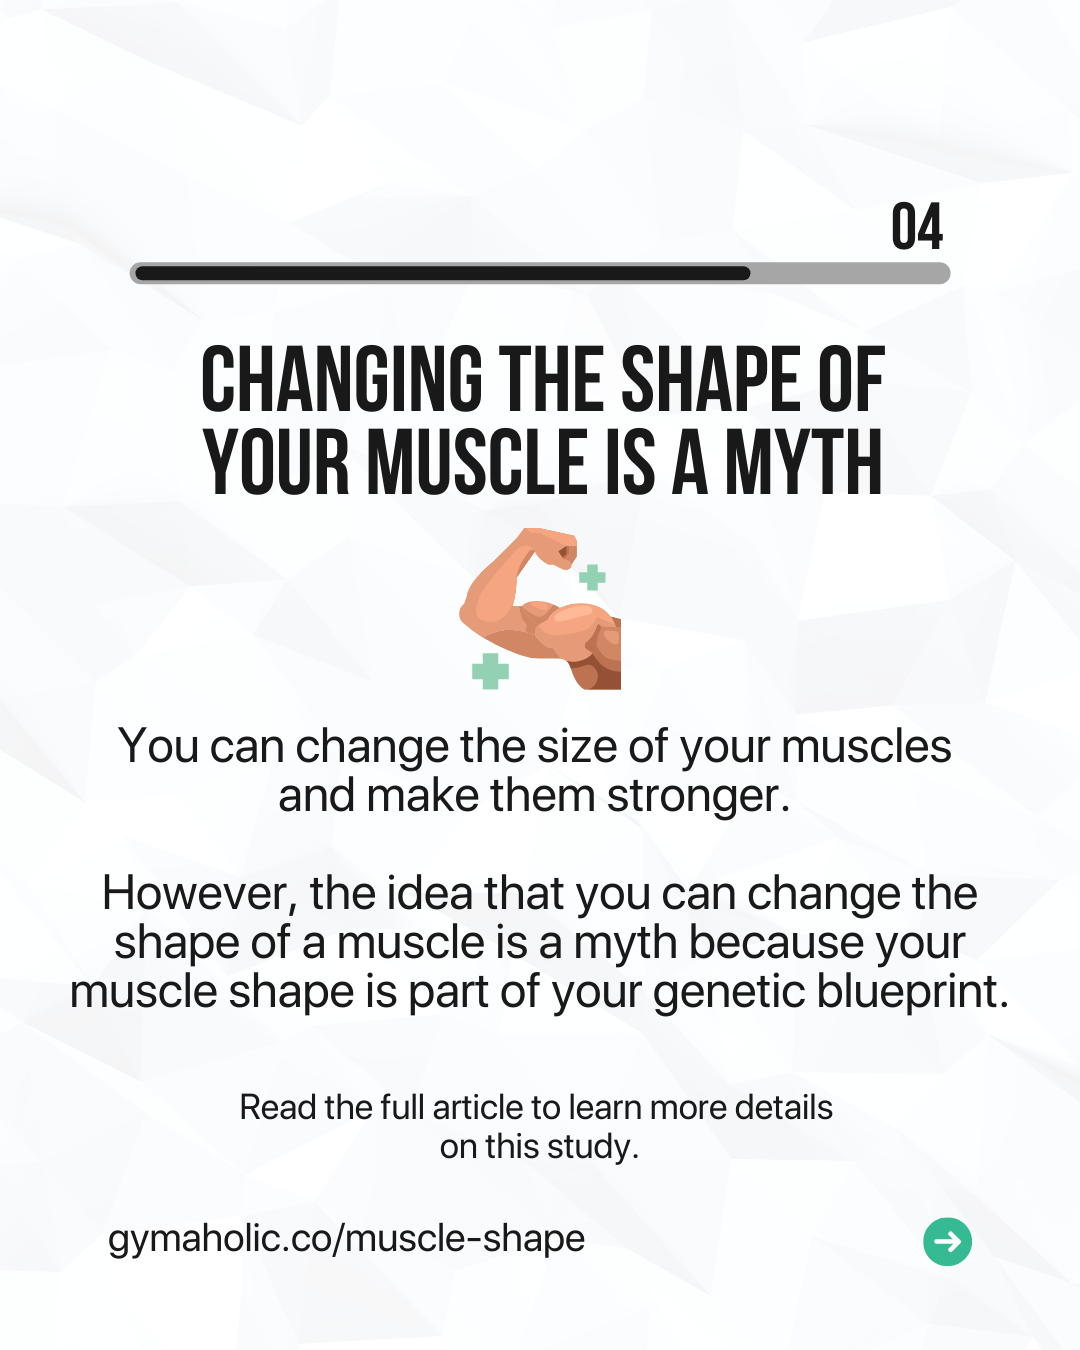 Can You Change the Shape of Your Muscles?